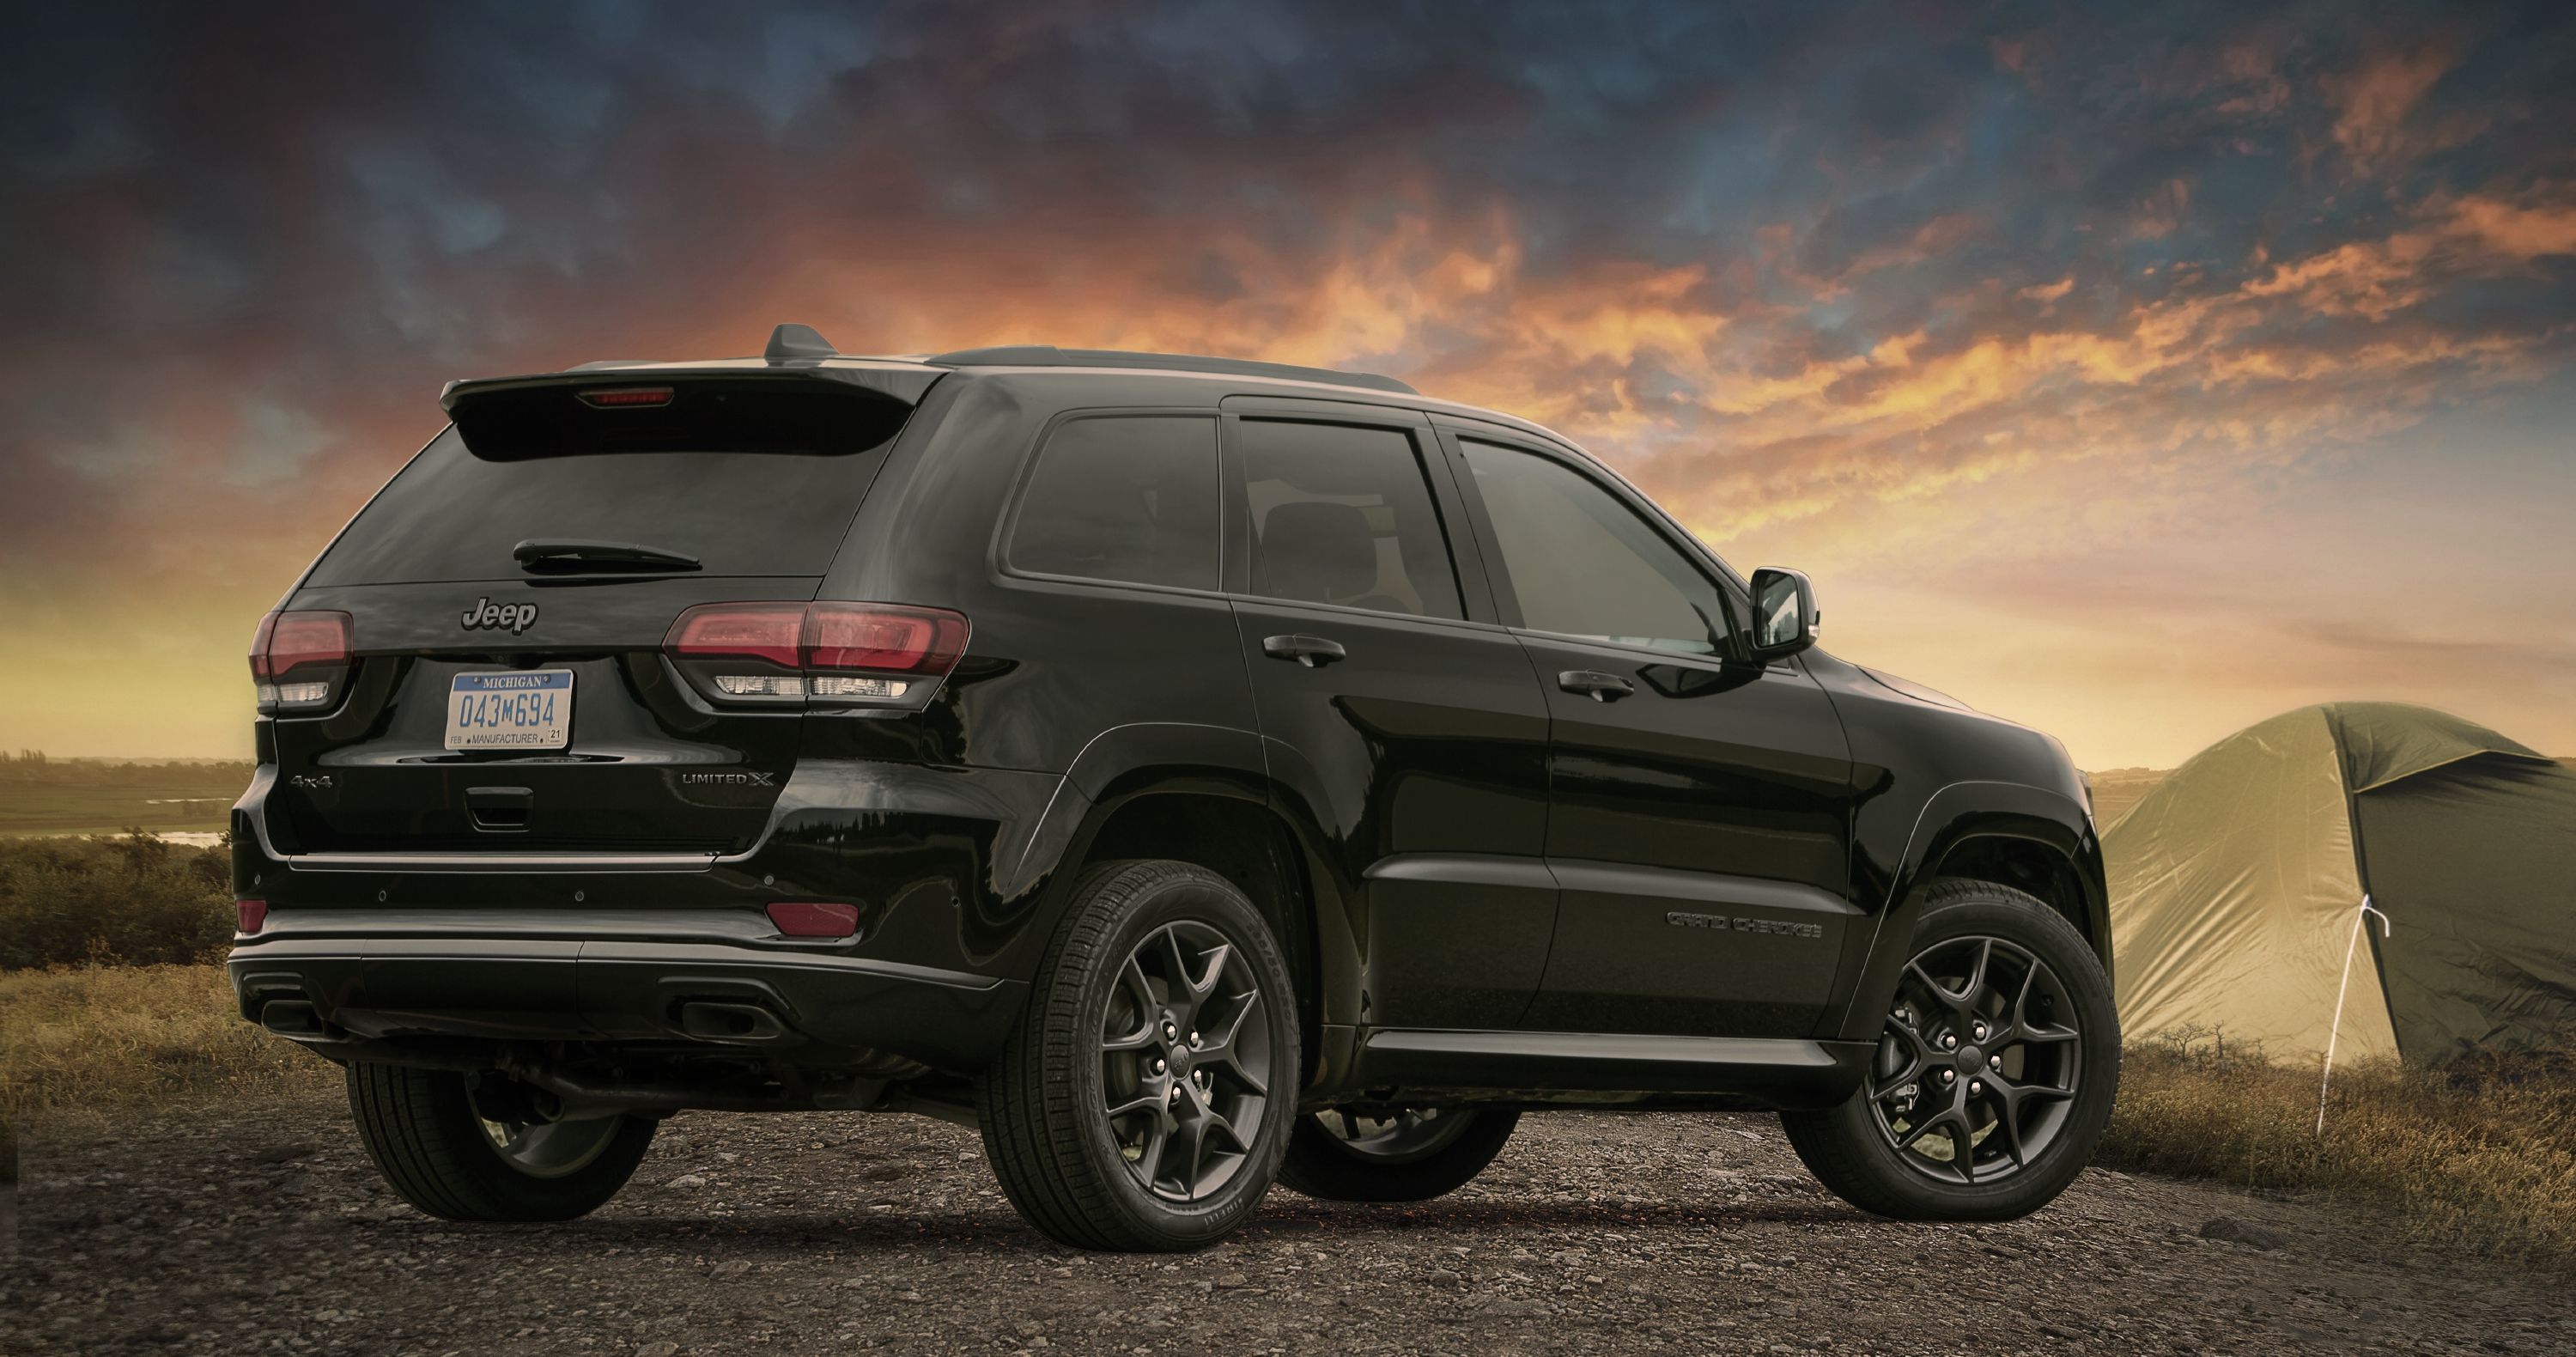 2020 Jeep Grand Cherokee Review, Pricing, and Specs